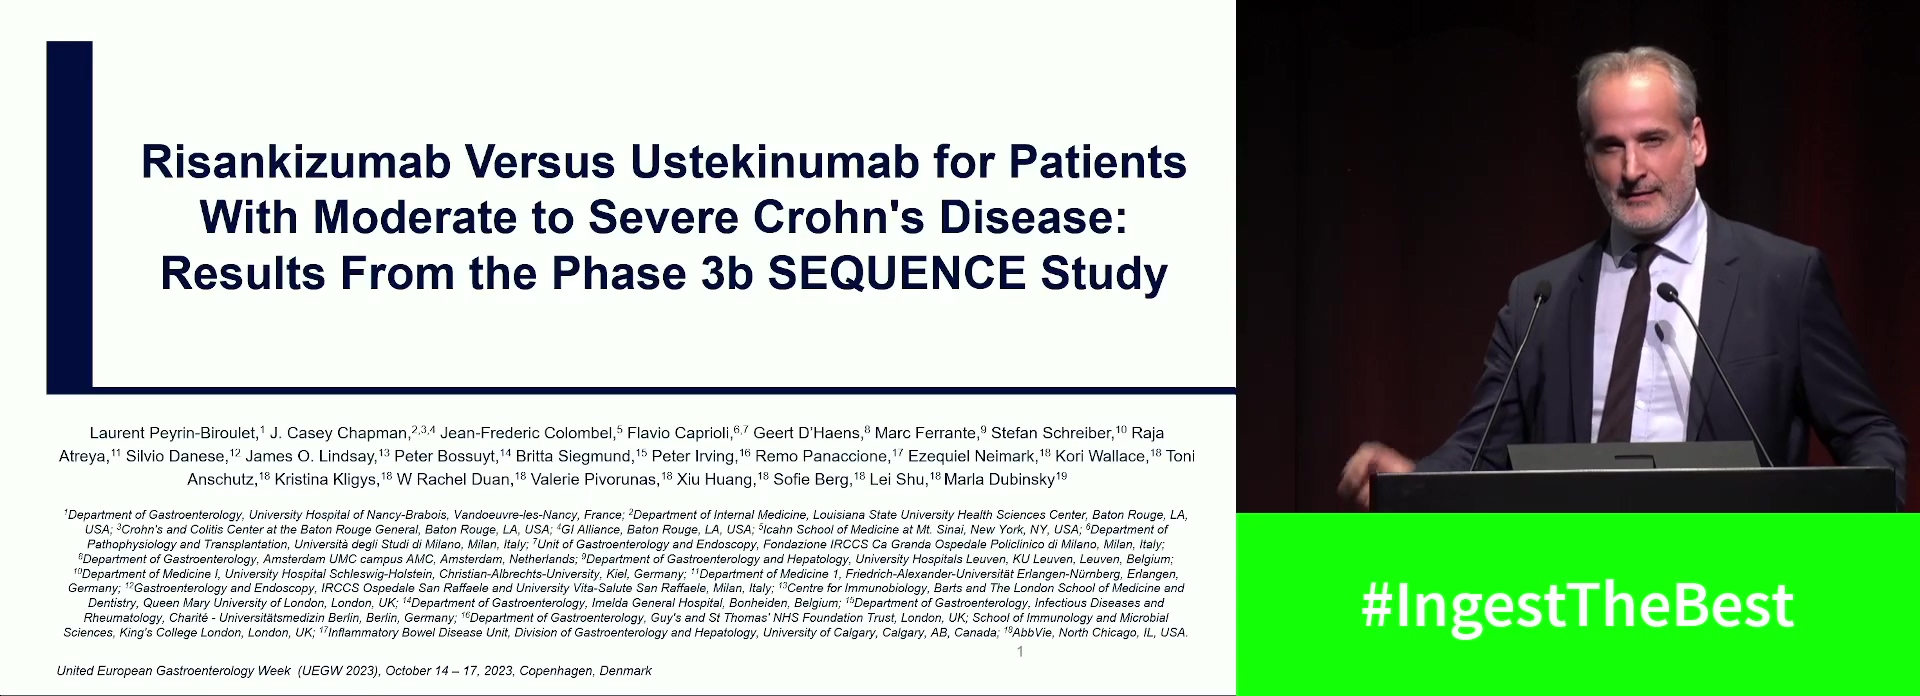 RISANKIZUMAB VERSUS USTEKINUMAB FOR PATIENTS WITH MODERATE TO SEVERE CROHN'S DISEASE: RESULTS FROM THE PHASE 3B SEQUENCE STUDY